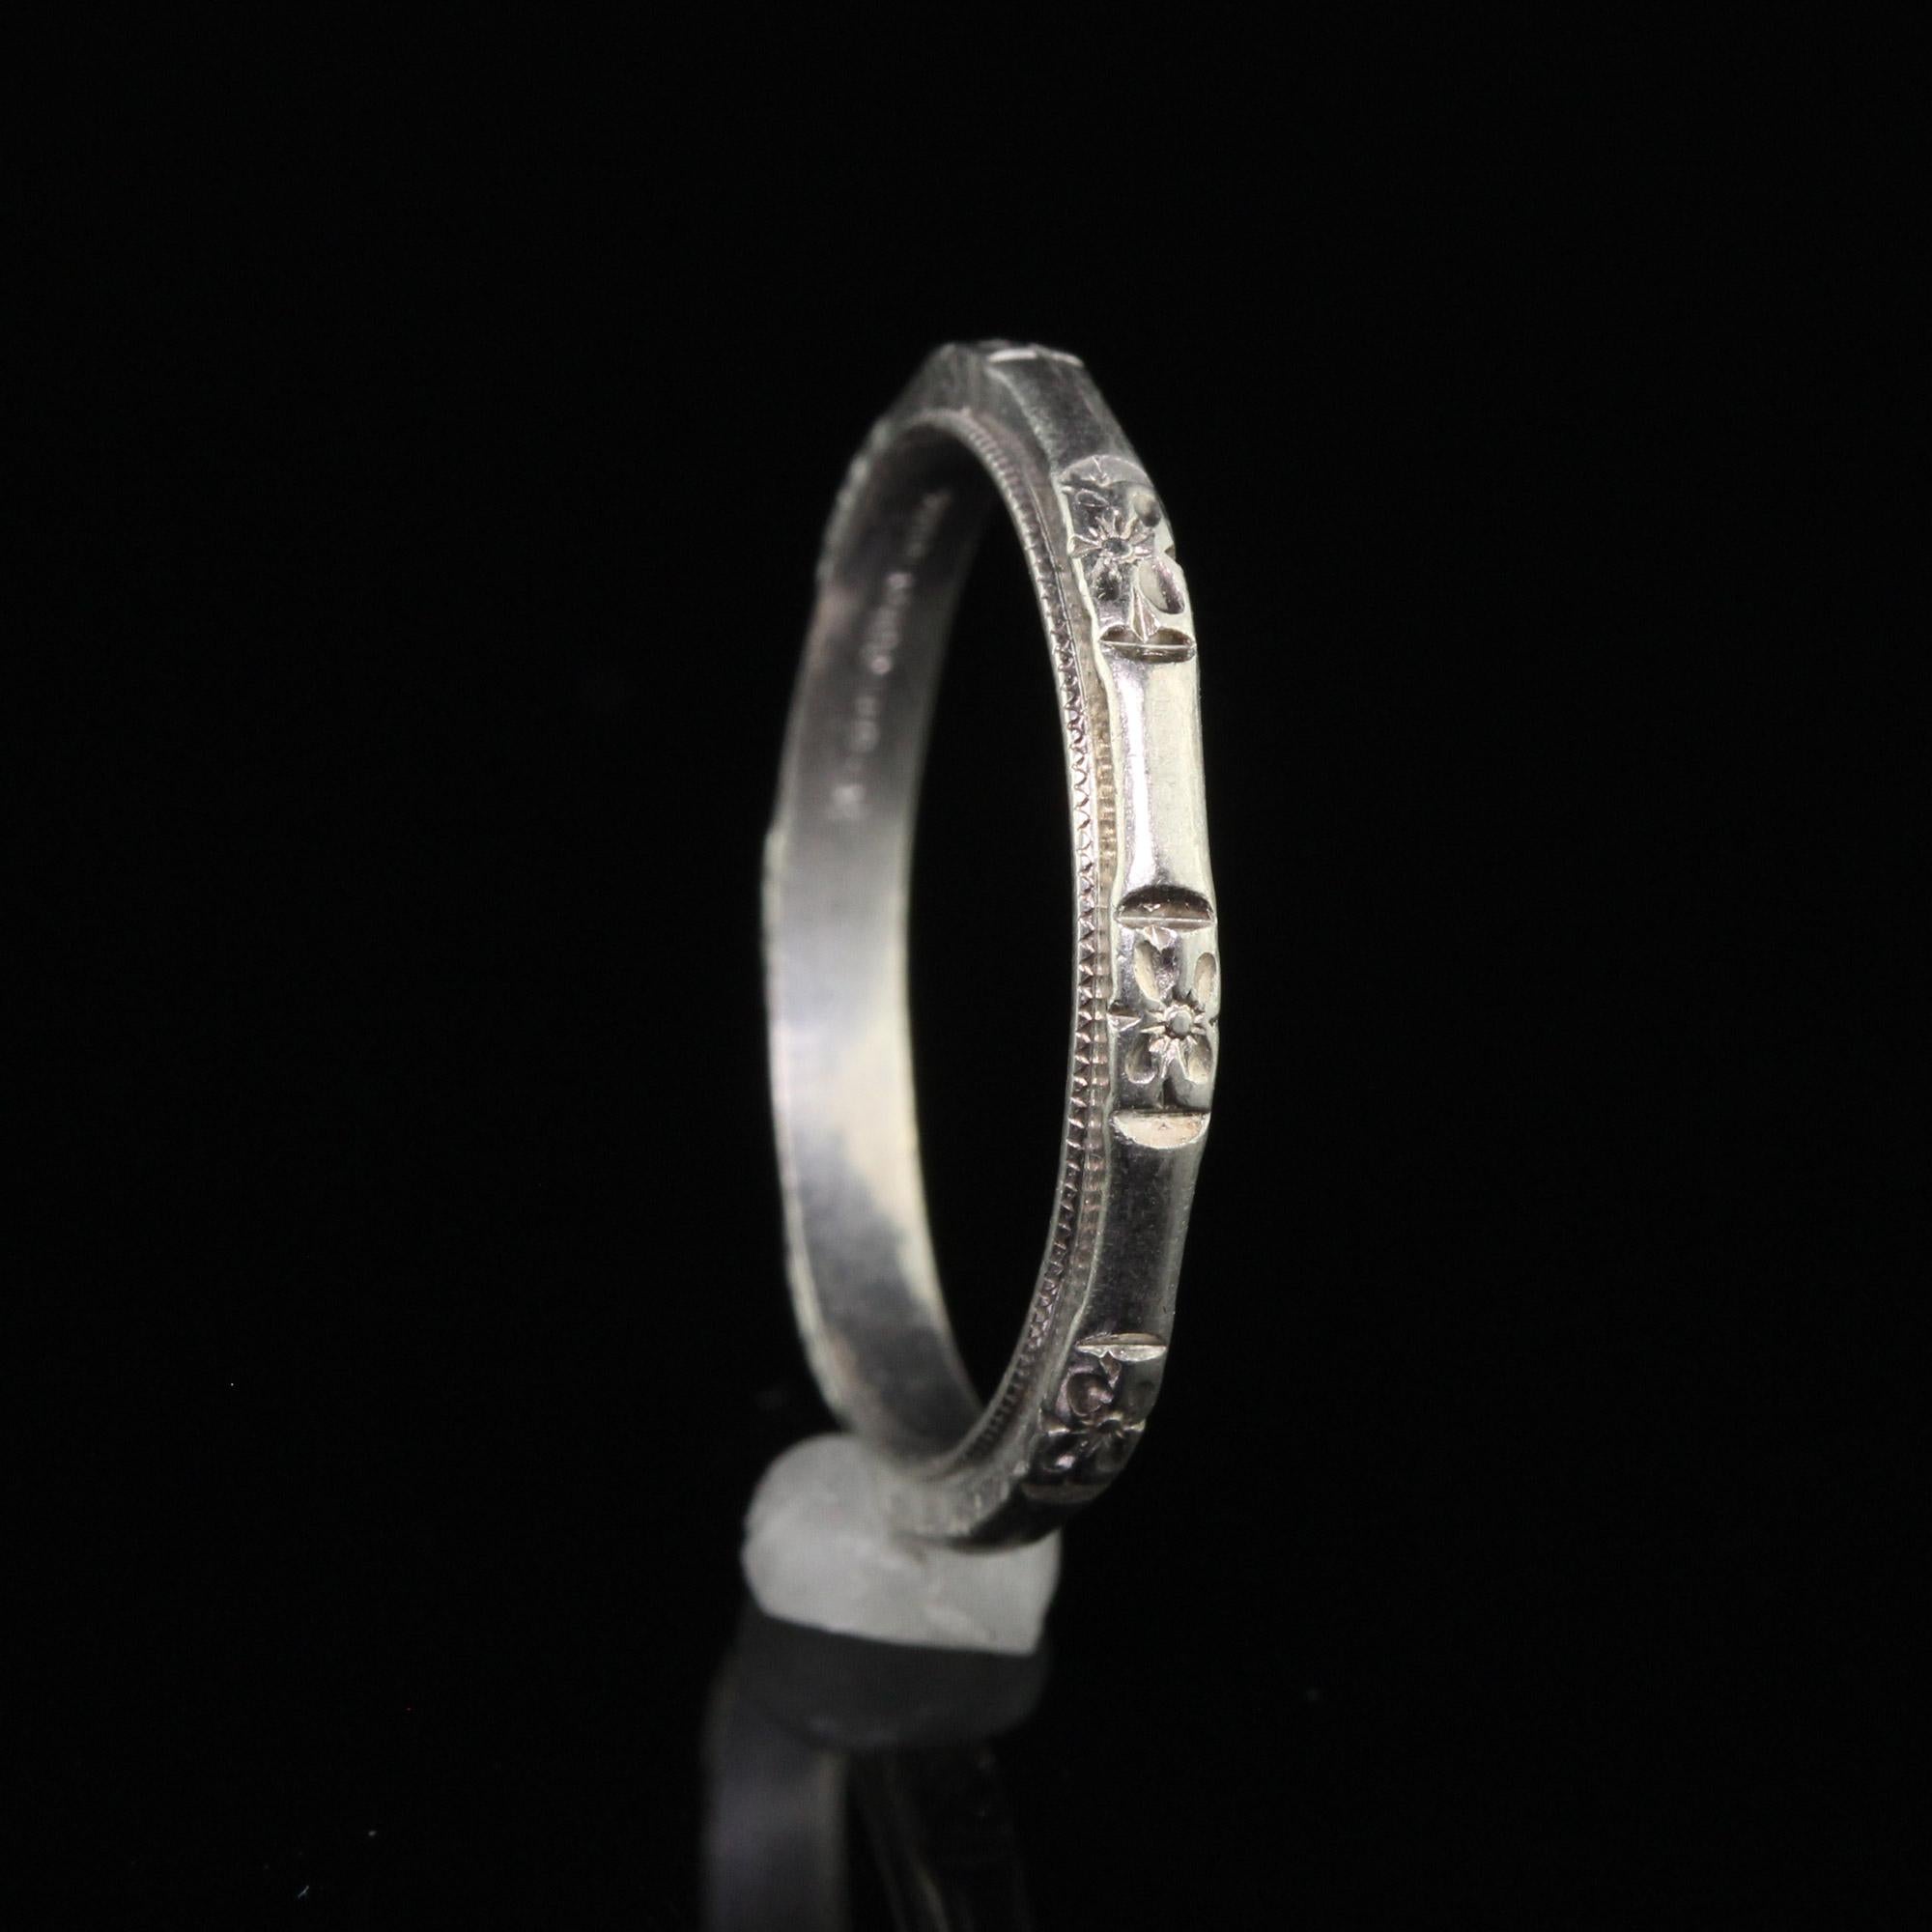 Antique Art Deco Platinum Blossom Design Engraved Wedding Band - Size 5 1/2 In Good Condition For Sale In Great Neck, NY